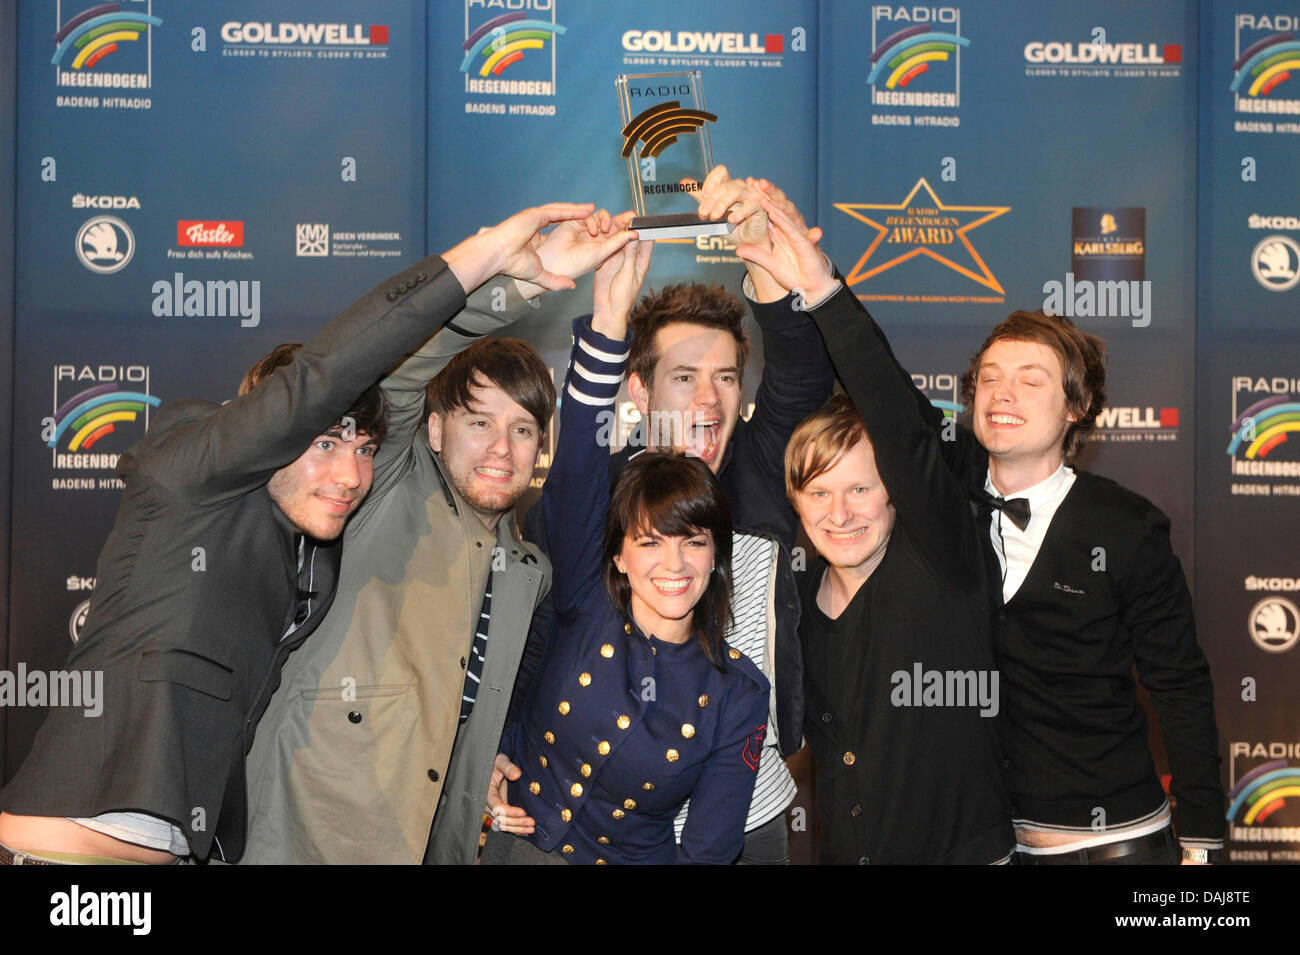 German rock band Revolverheld and Czech singer Marta Jandova pose with  their Radio Regenbogen Award in Karlsruhe, Germany, 25 March 2011. The  Mannheim-based radio station awards the prize to about a dozen